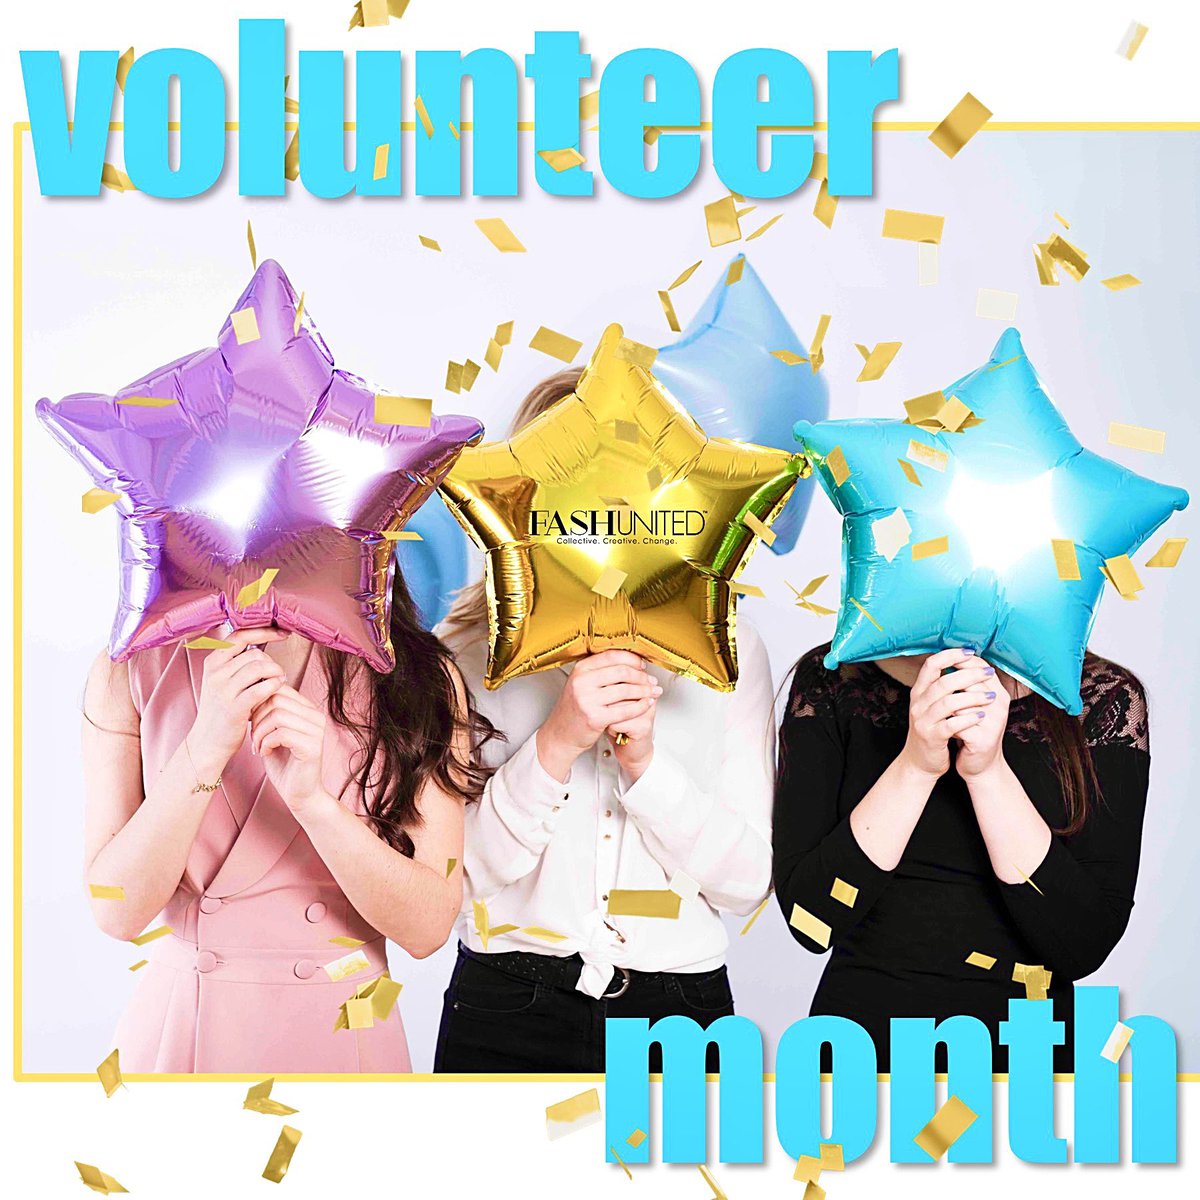 #WednesdayWisdom! “ #Volunteers do not necessarily have the time; they just have the #heart!” - #ElizabethAndrew #WednesdayWisdom #Grateful #ThankYou #Volunteer #VolunteerMonth #Charity 💝💖💝 #FASHUNITED